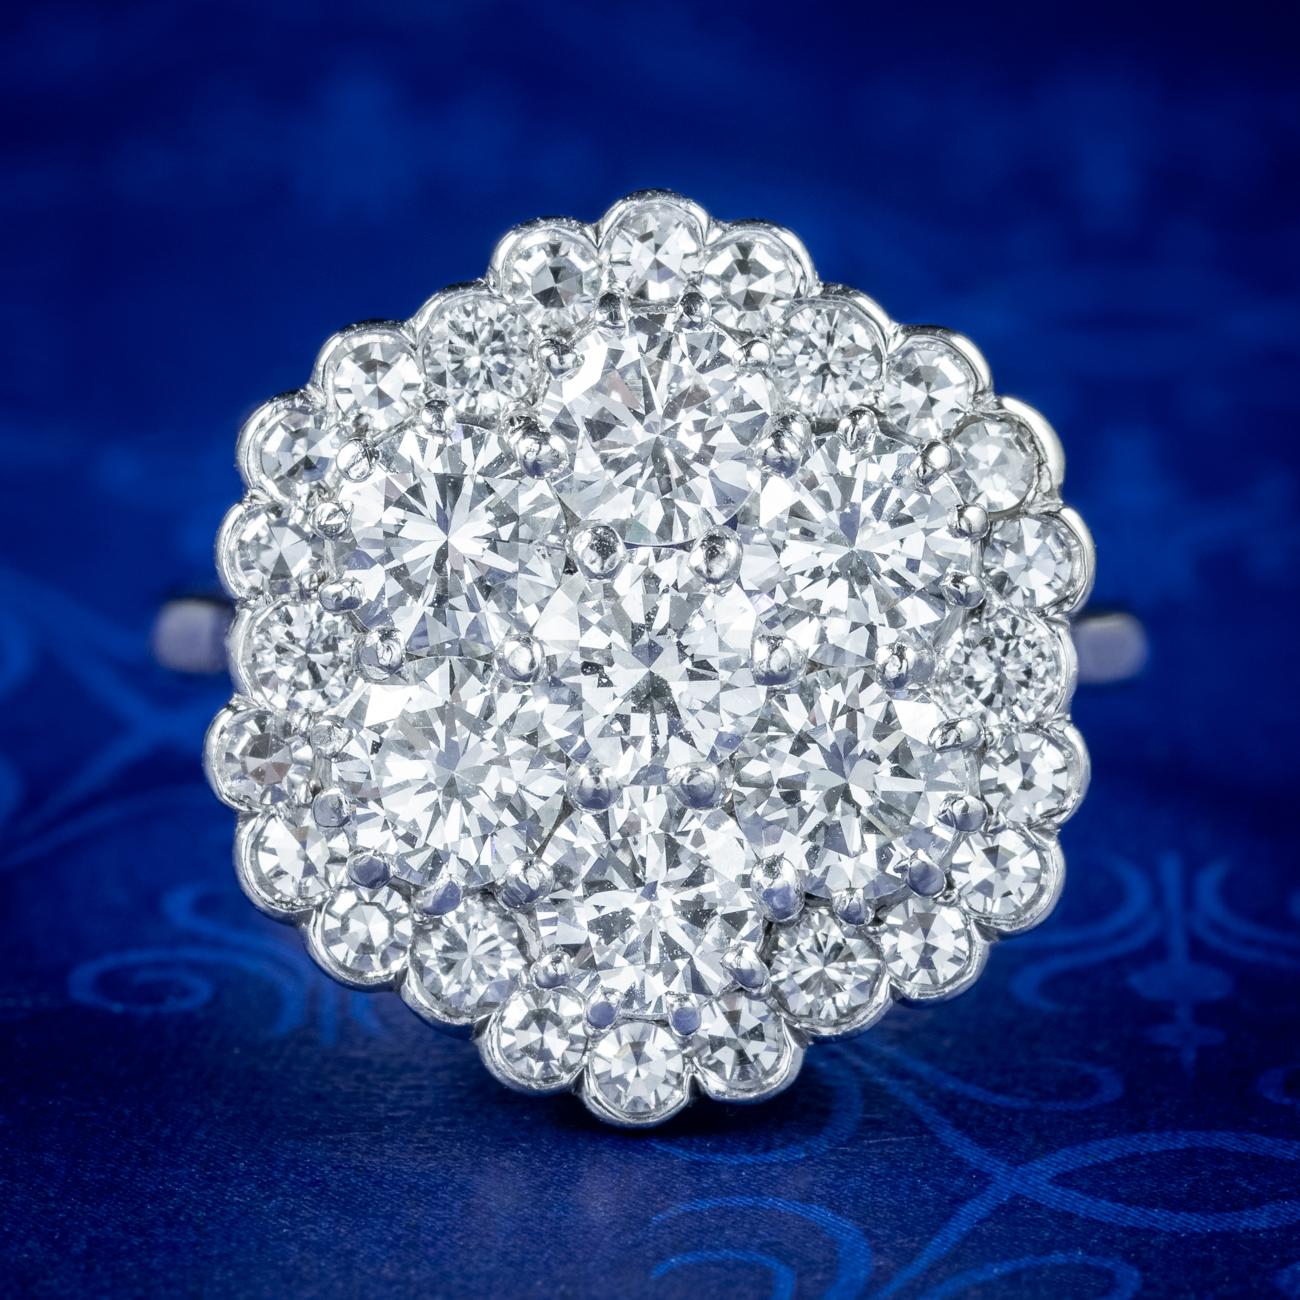 A glorious diamond flower cluster ring showcasing seven stunning brilliant cut diamonds arranged in a tiered cluster in the centre with a border of smaller diamonds chasing around the outside. The diamonds are exceptionally bright and full of life